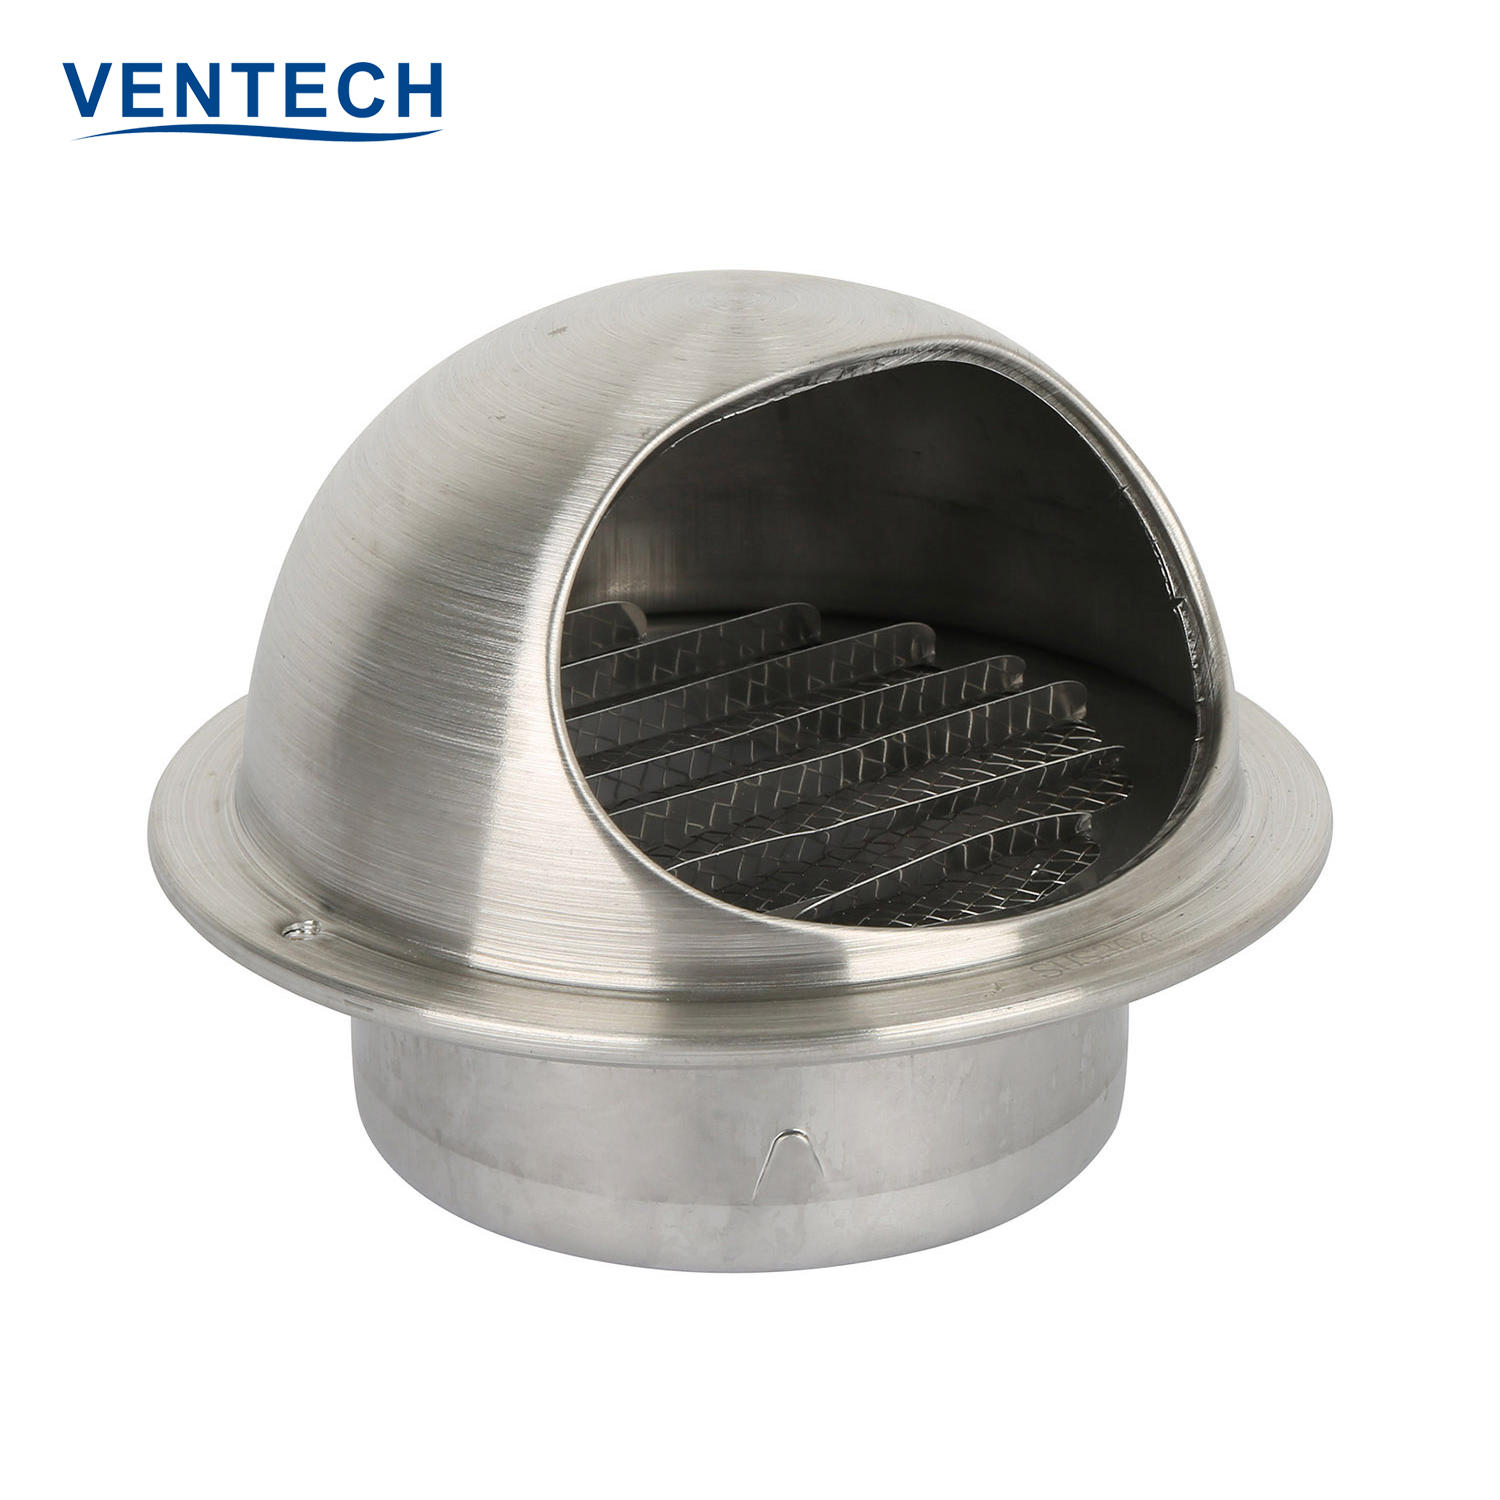 Hvac Exterior Wall 304 Stainless Steel Waterproof Exhaust Air Vent Cap Ball Weather Louver